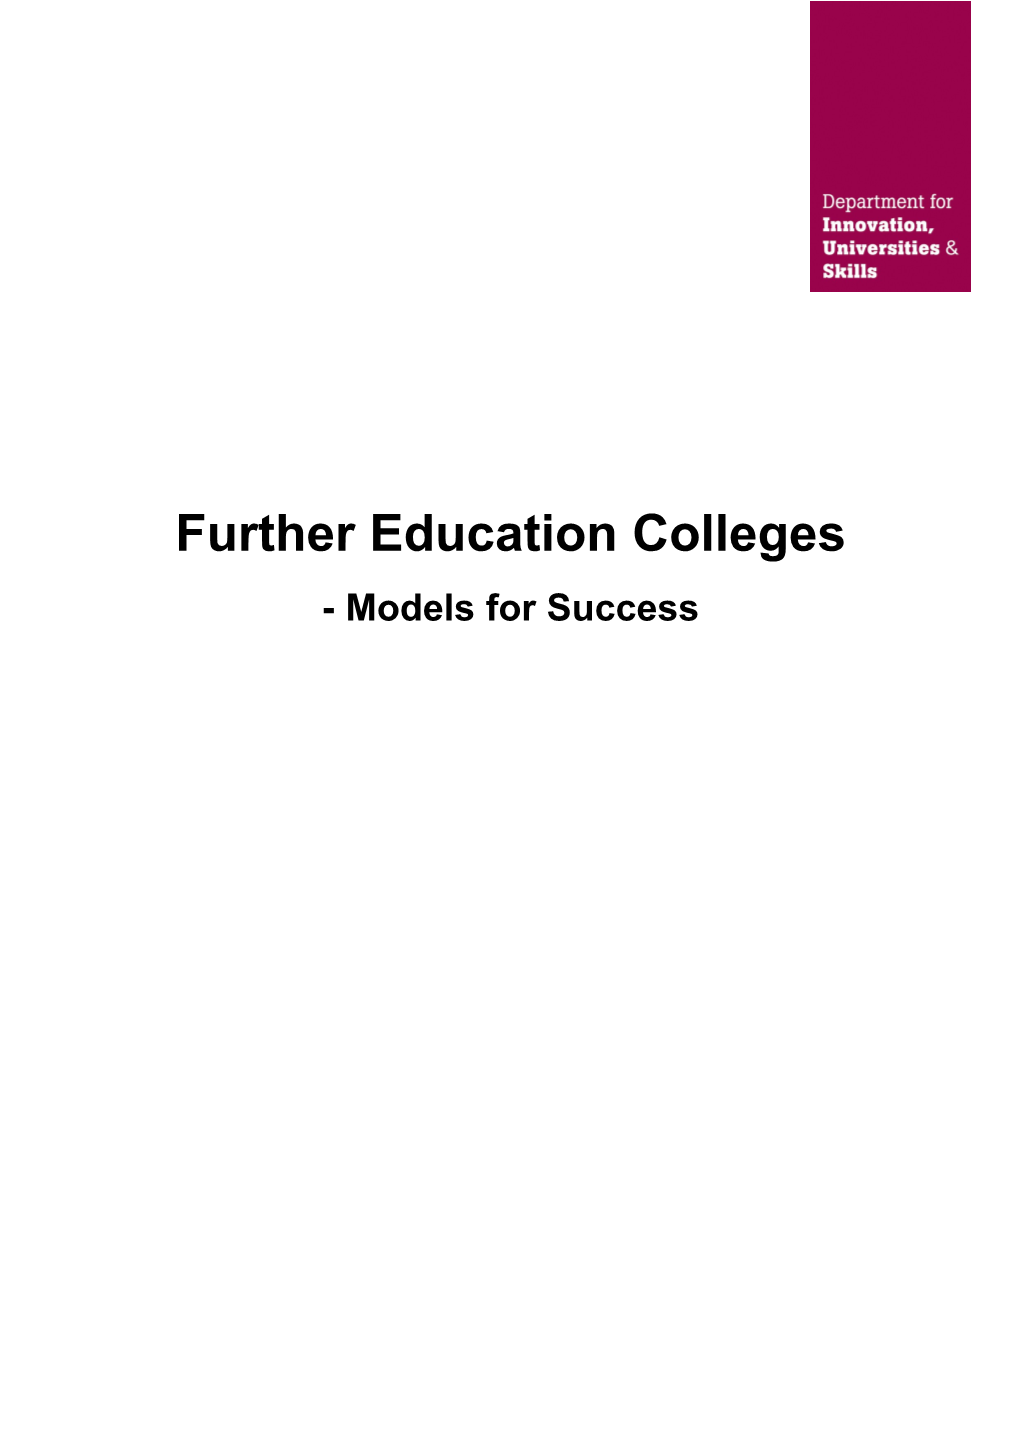 Further Education Colleges